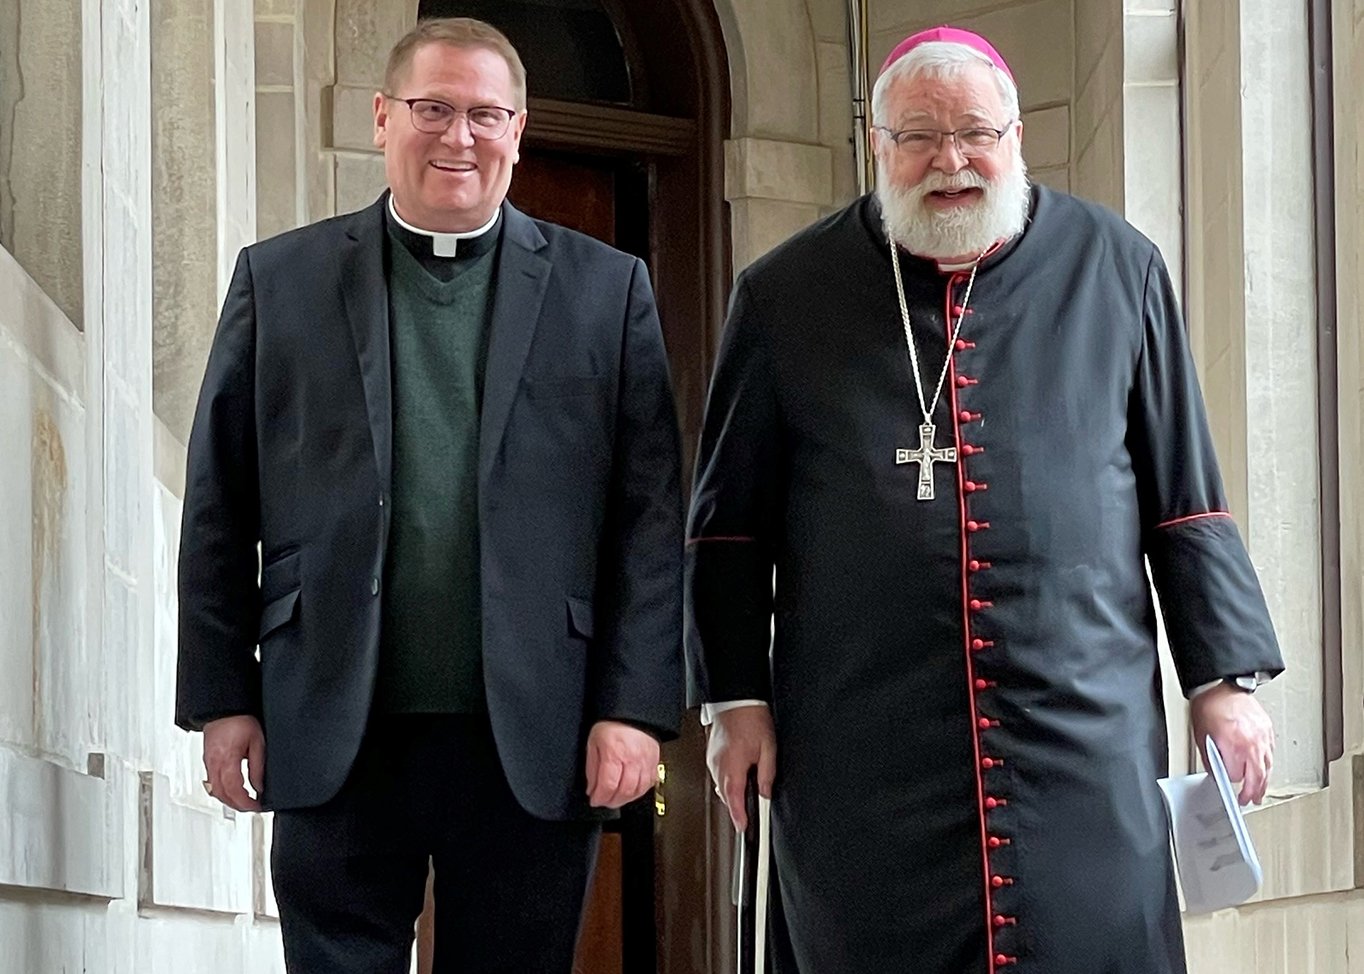 Coadjutor Bishop Louis Tylka, left, and Bishop Daniel R. Jenky are seen at St. Mary's Cathedral in Peoria, Ill., Feb. 23, 2022. Pope Francis accepted the resignation of Bishop Jenky March 3, 2022, and as coadjutor, Bishop Tylka immediately succeeds him as